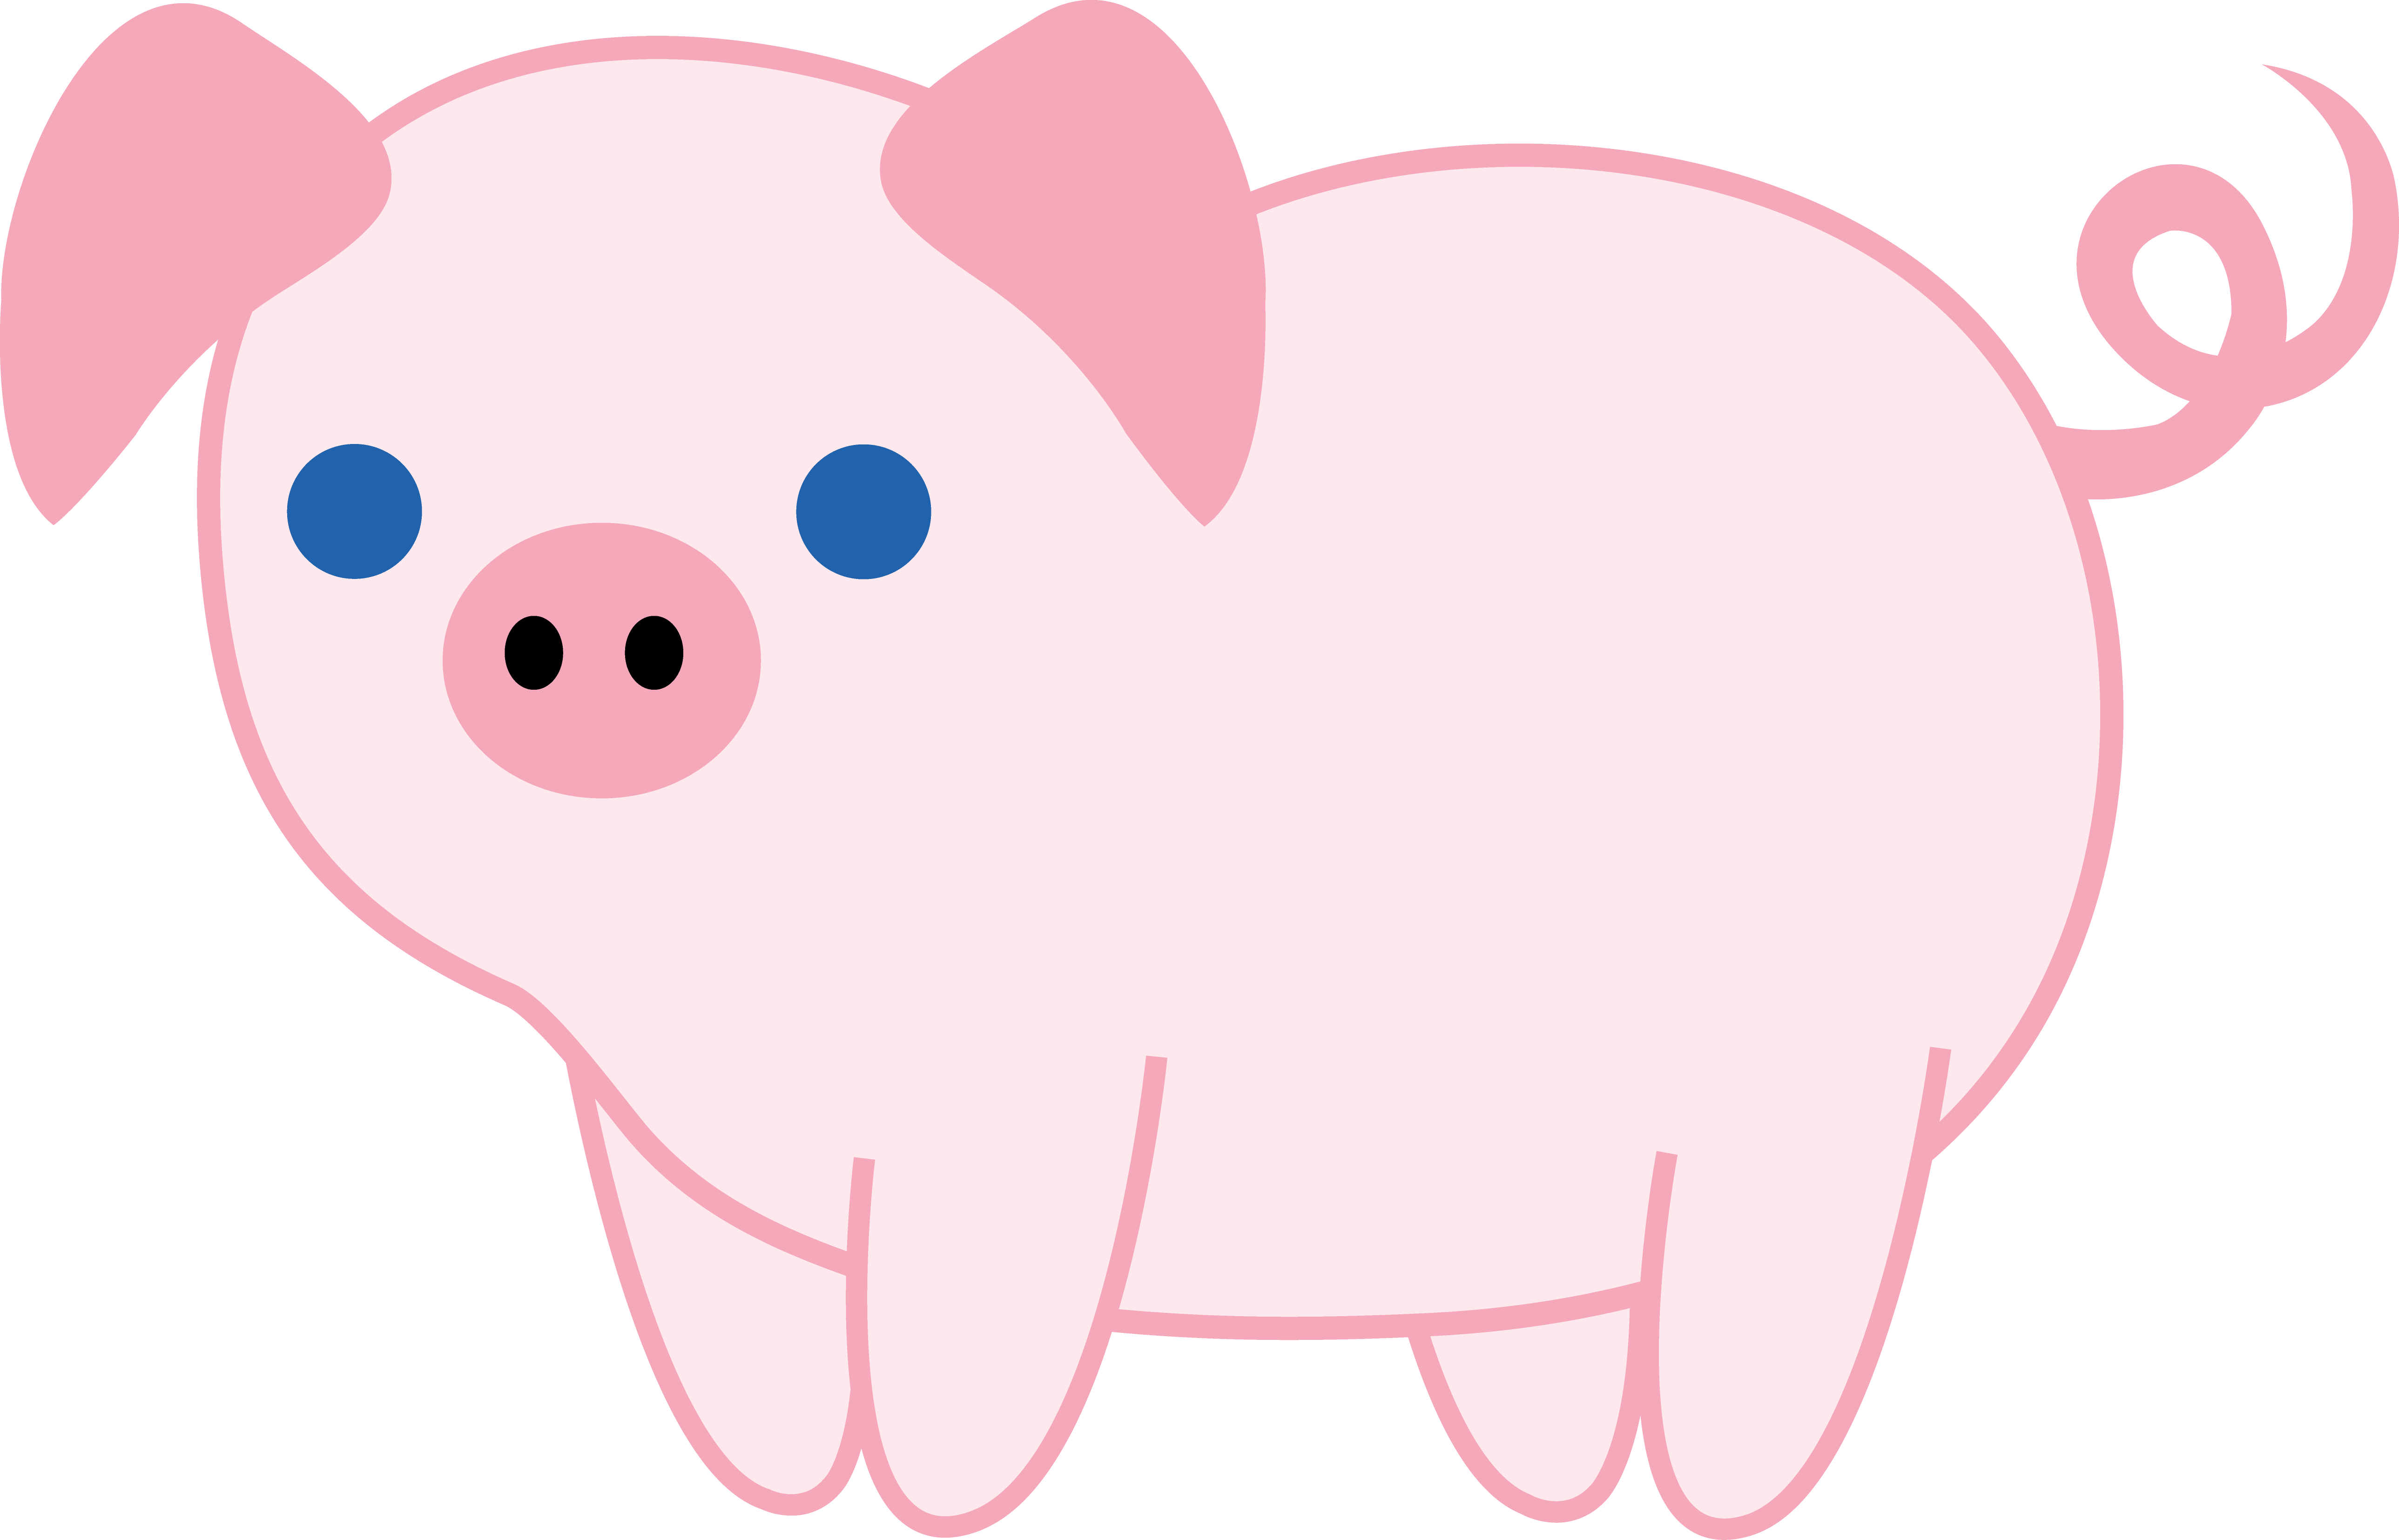 Free Cute Pig Picture Cartoon, Download Free Clip Art, Free Clip